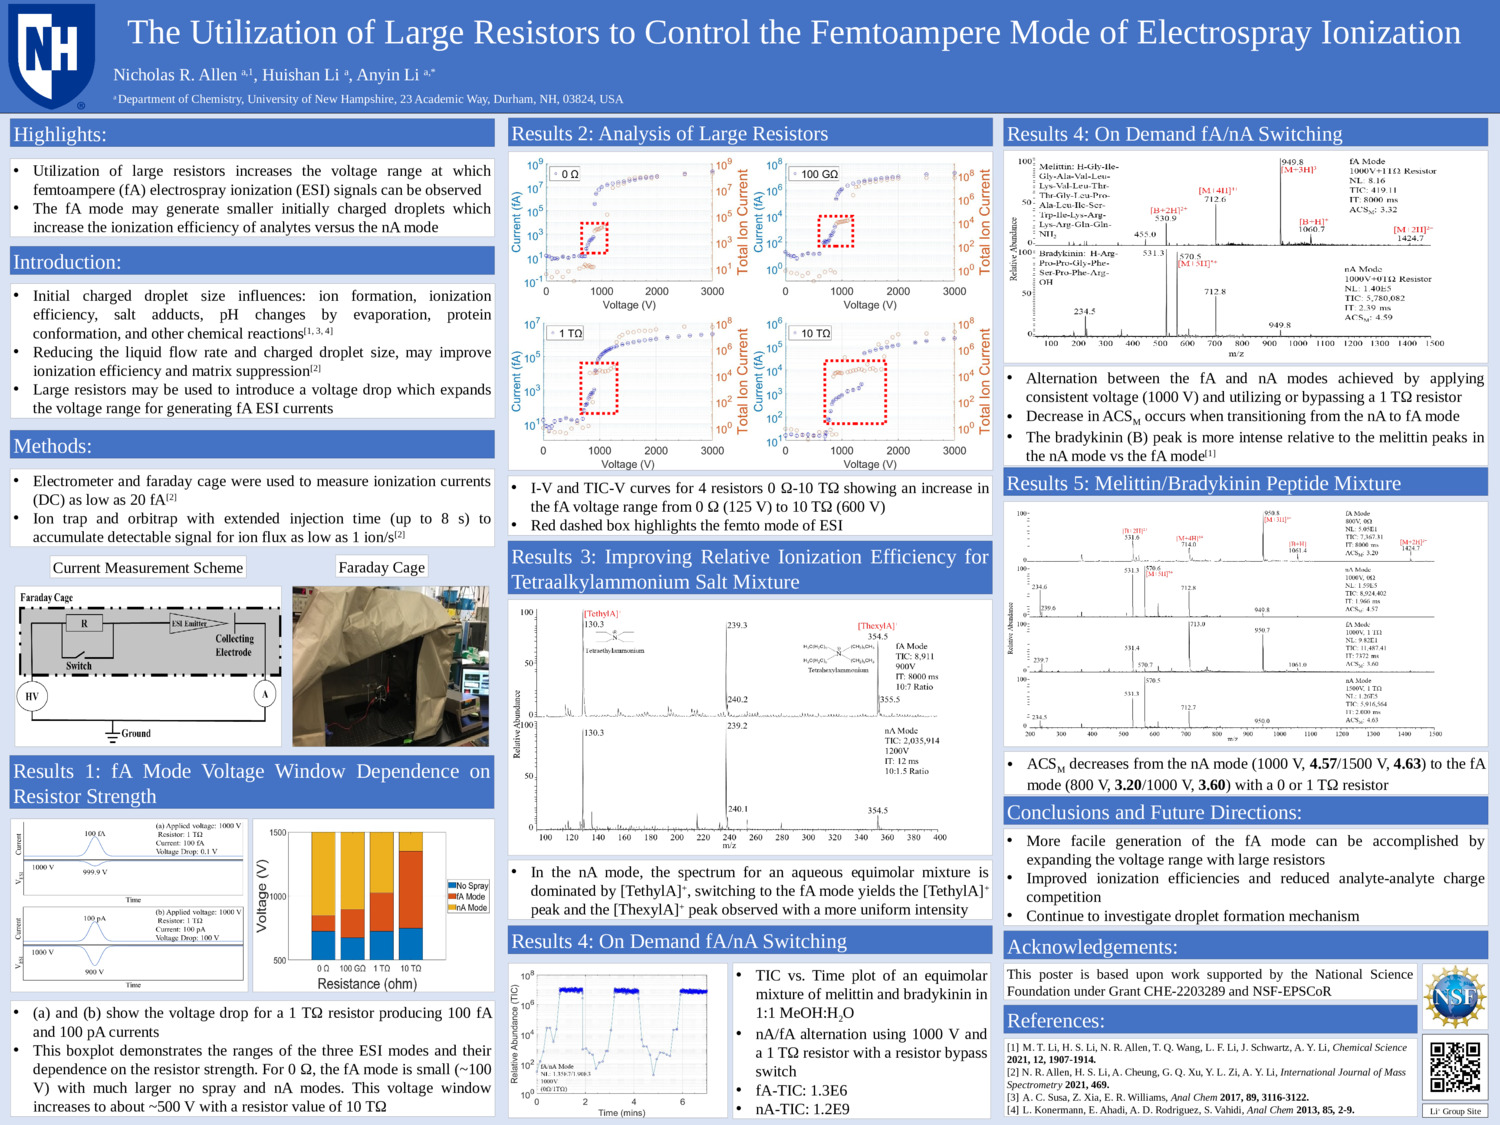 The Utilization Of Large Resistors To Control The Femtoampere Mode Of Electrospray Ionization by nra1001